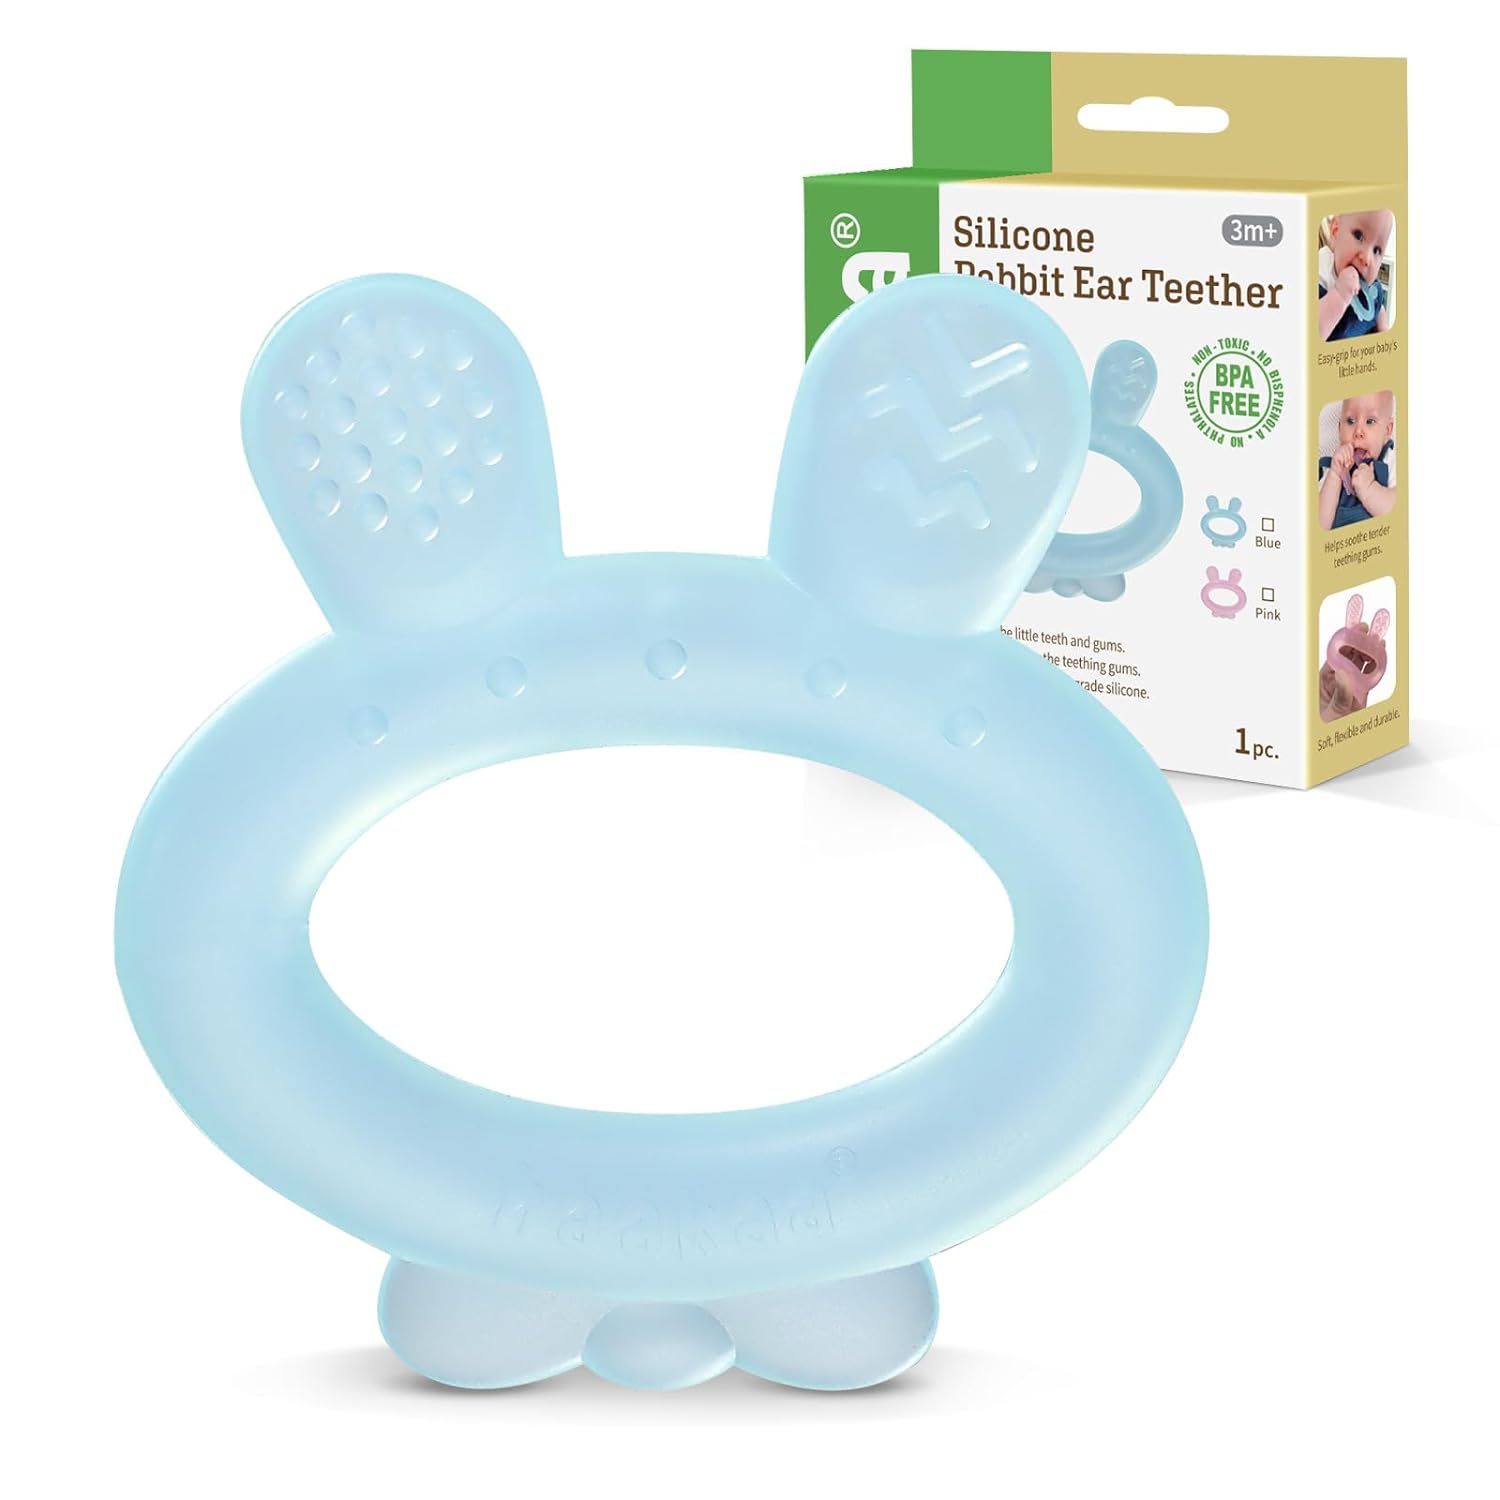 Haakaa Silicone Baby Teether - Rabbit Ear Frozen Teething Toy for Babies - Cold Teething Relief - BPA Free Silicone -Blue